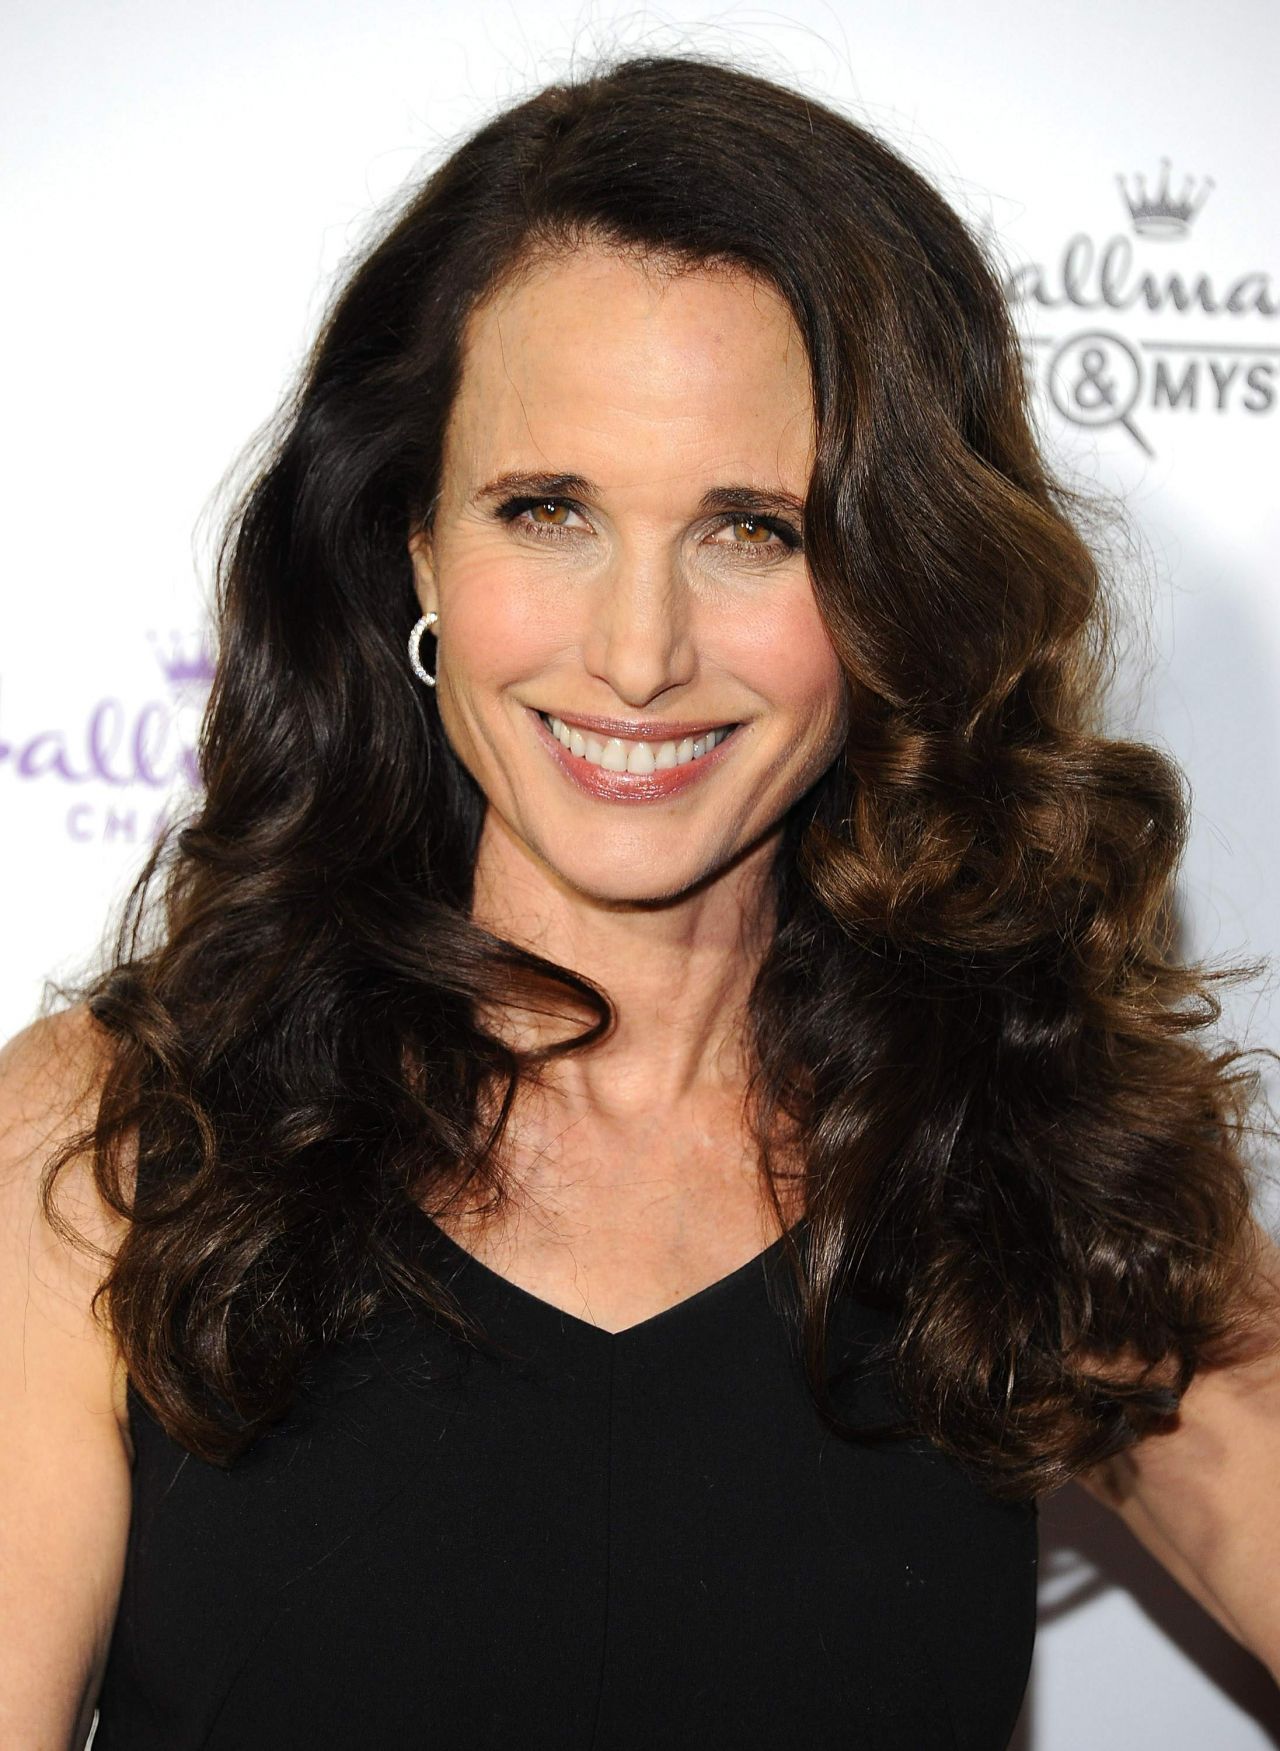 Andie MacDowell - Hallmark Channel Winter TCA Party in 